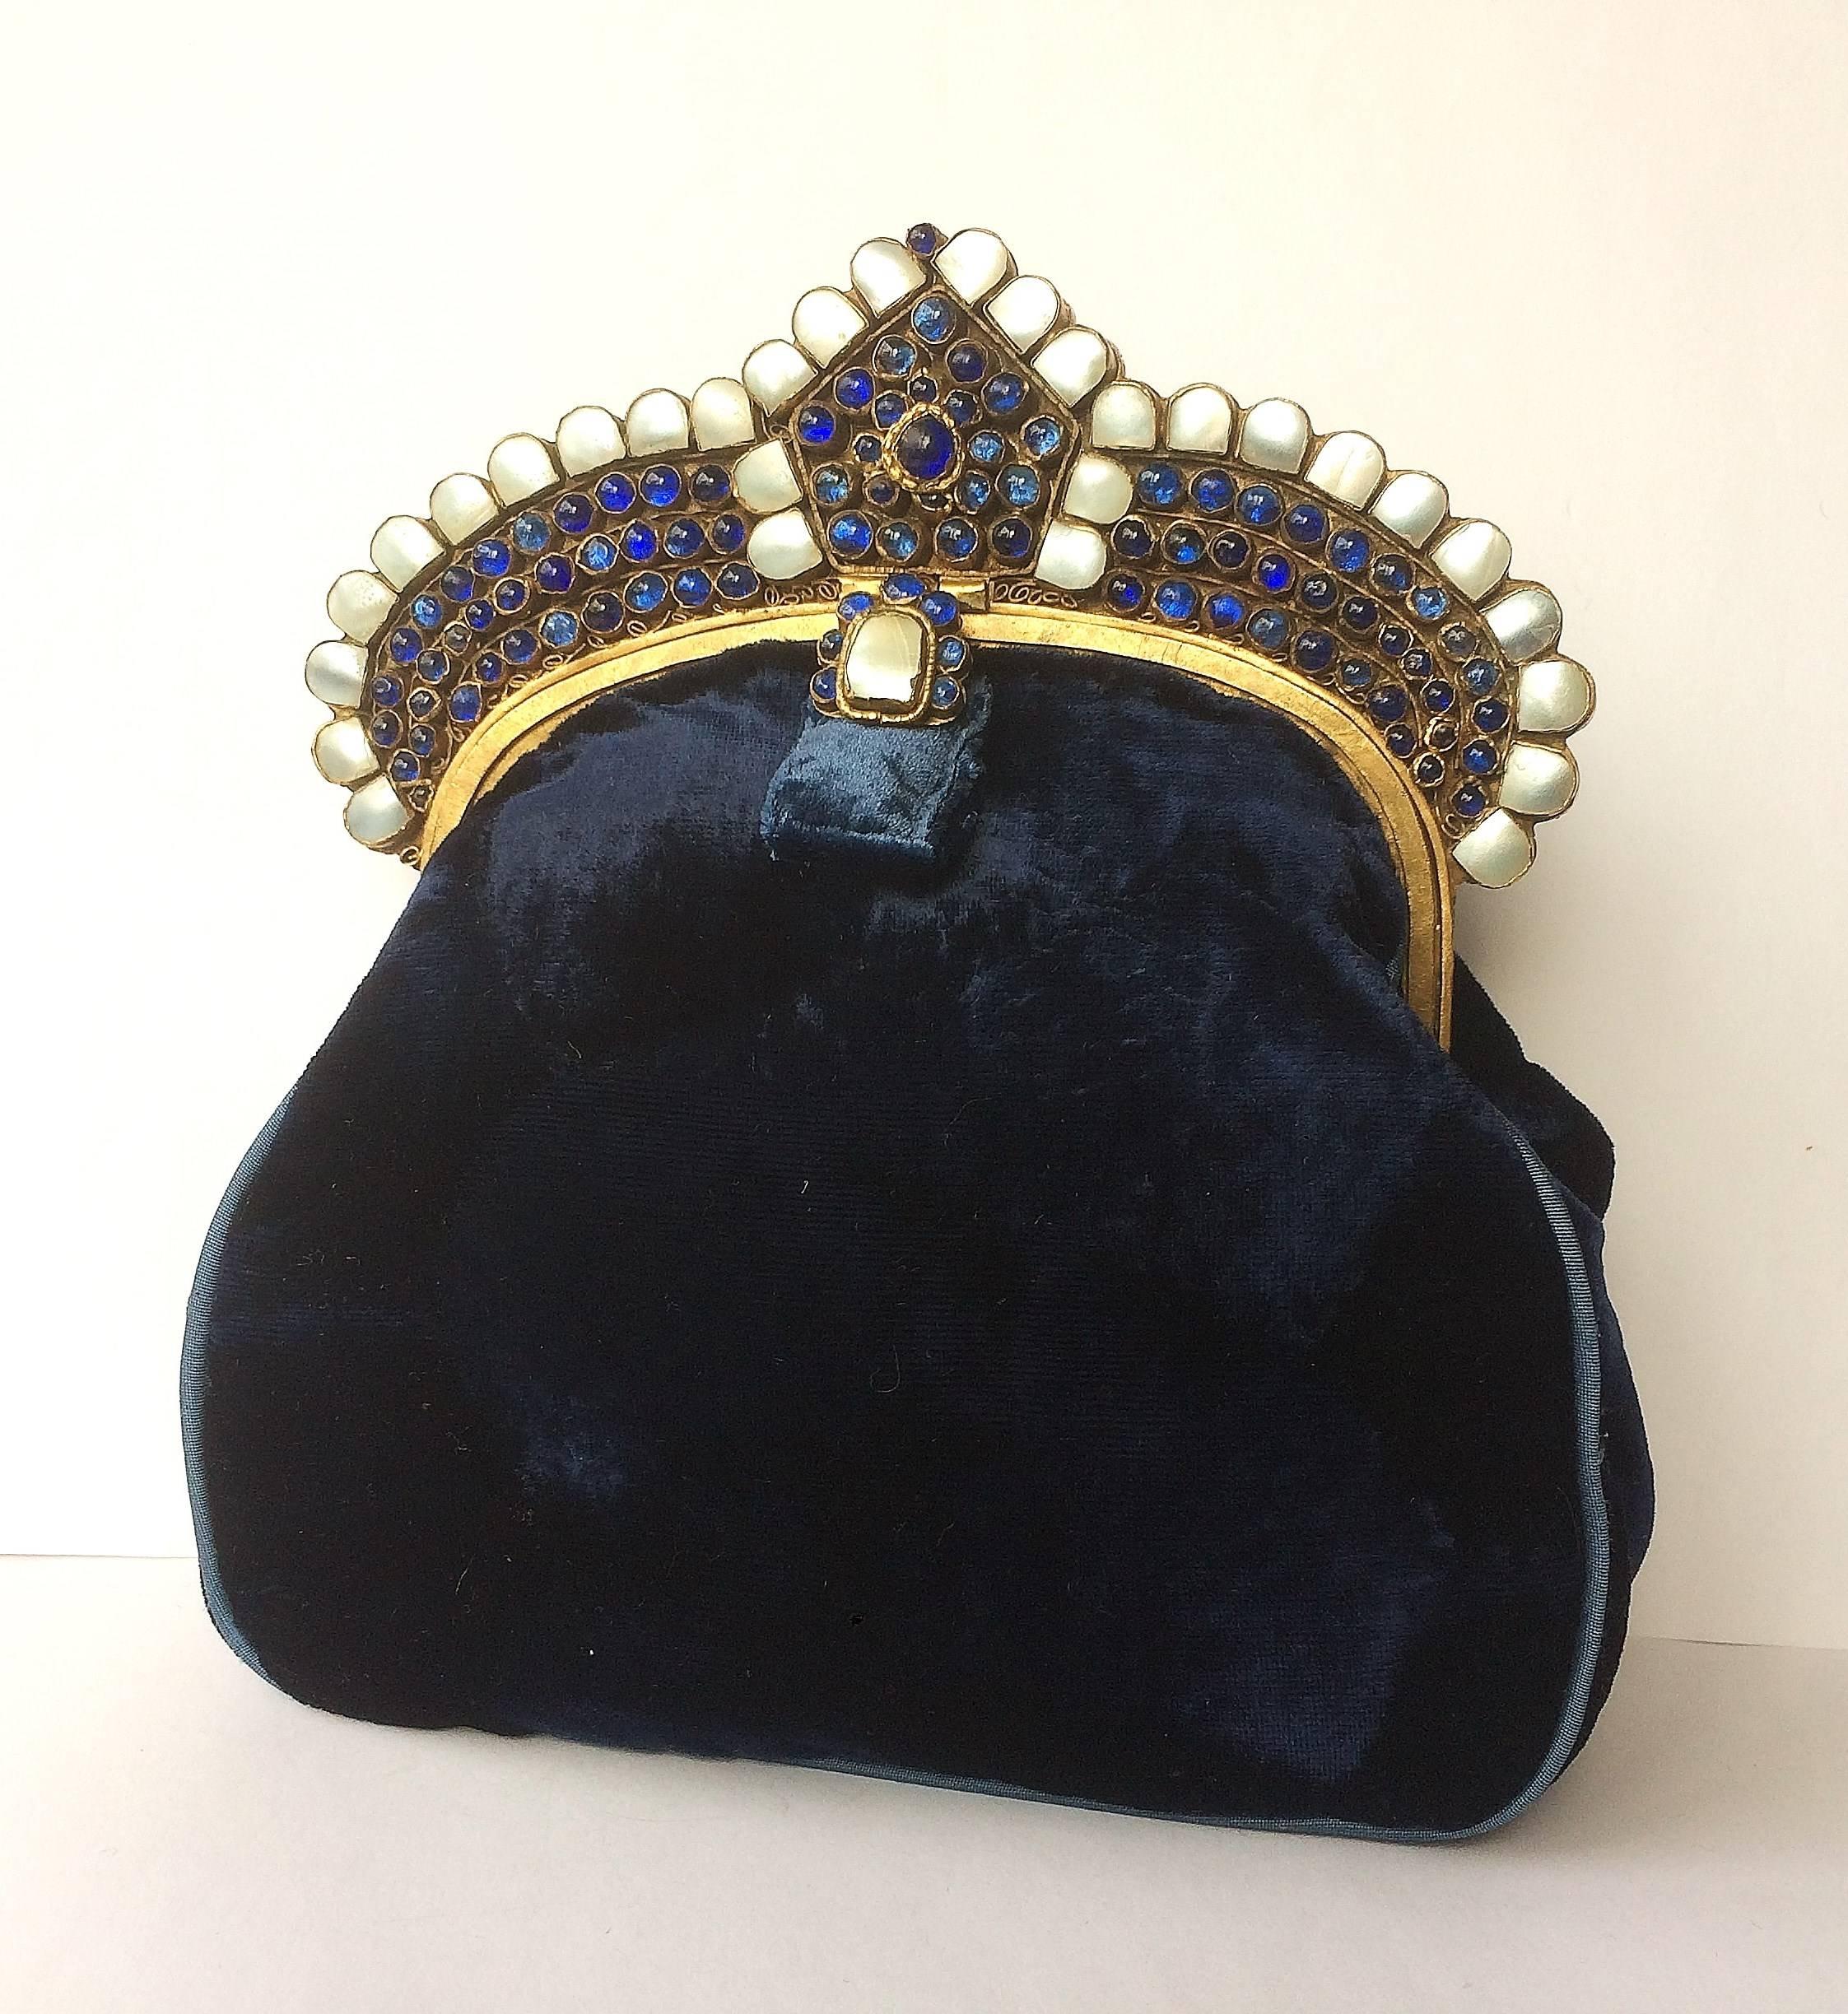 A sumptuous, rich, dark blue clutch bag from the 1920s, in a distinctive Moghul style, made from Royal blue silk velvet, most likely French in origin.
The frame is made from base metal/brass, set with sapphire 'poured glass' cabuchons and mother of